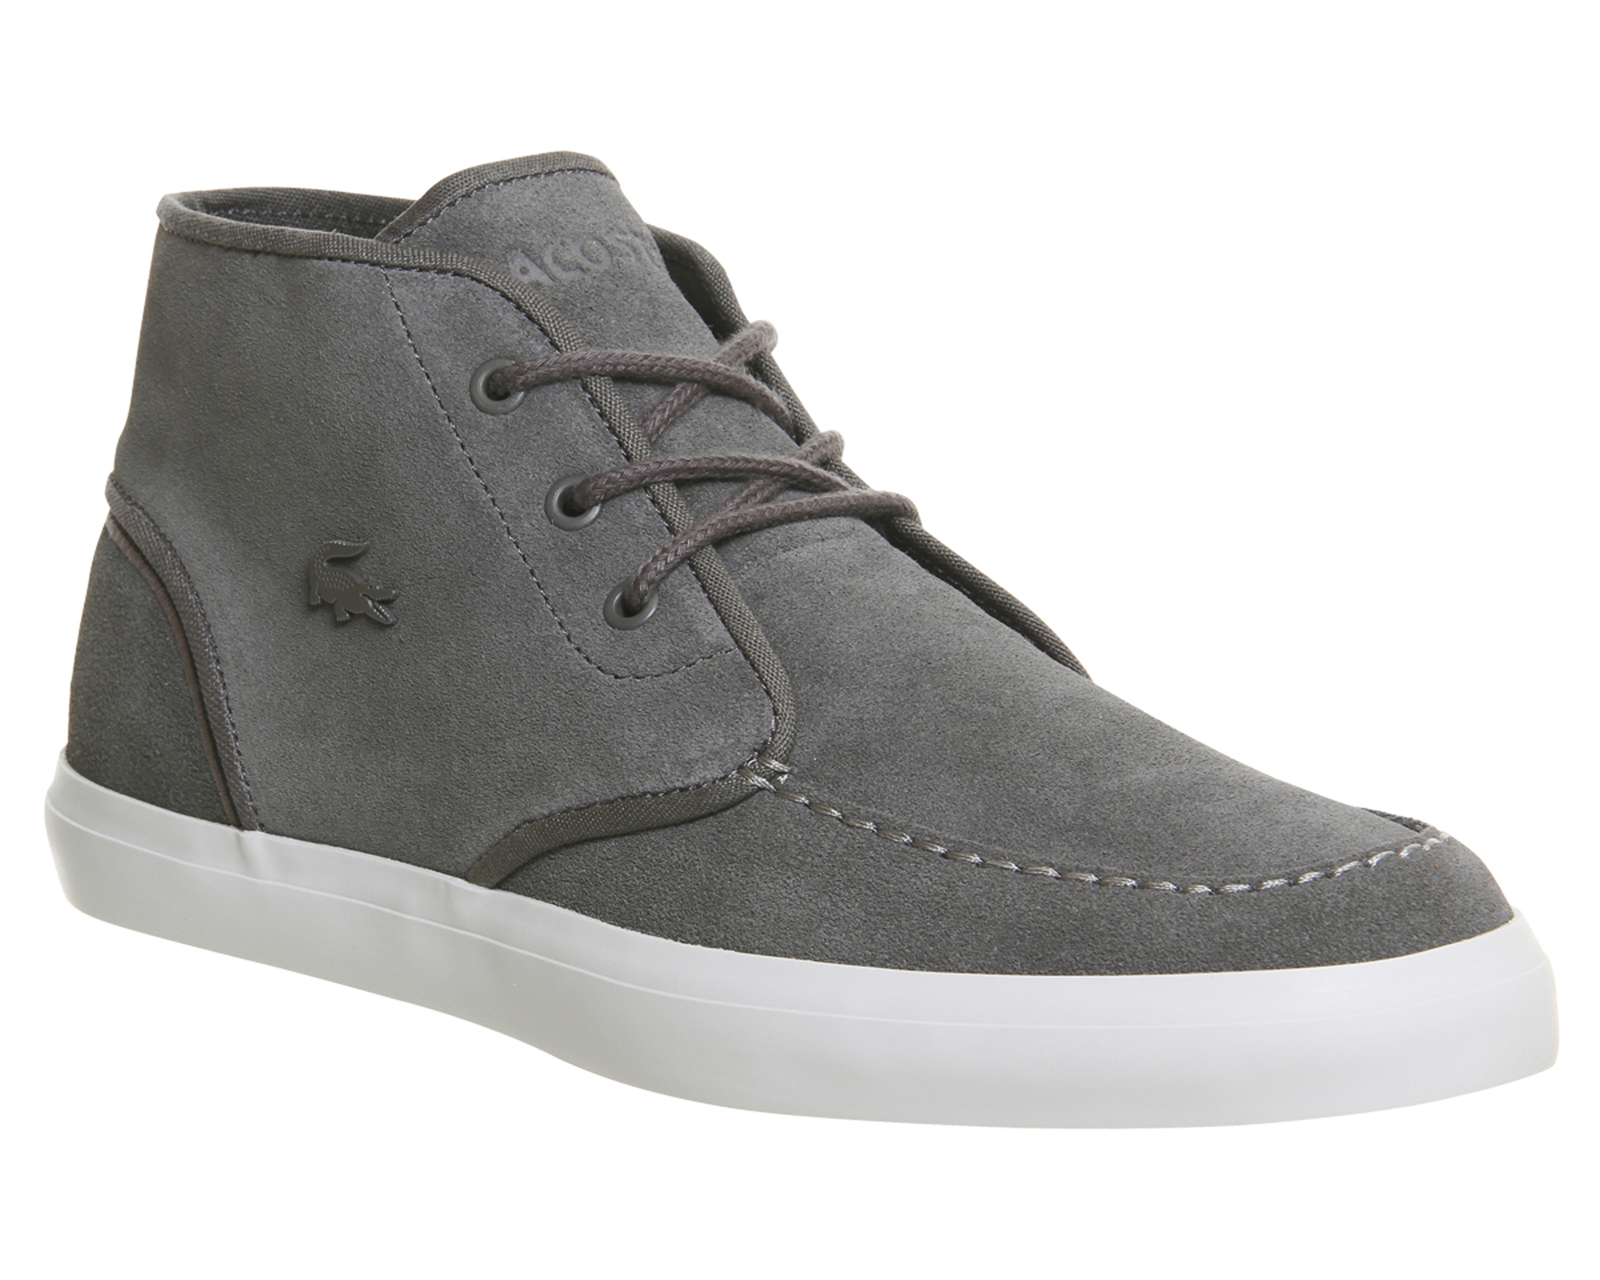 Lacoste Sevrin Mid Dark Grey - His trainers